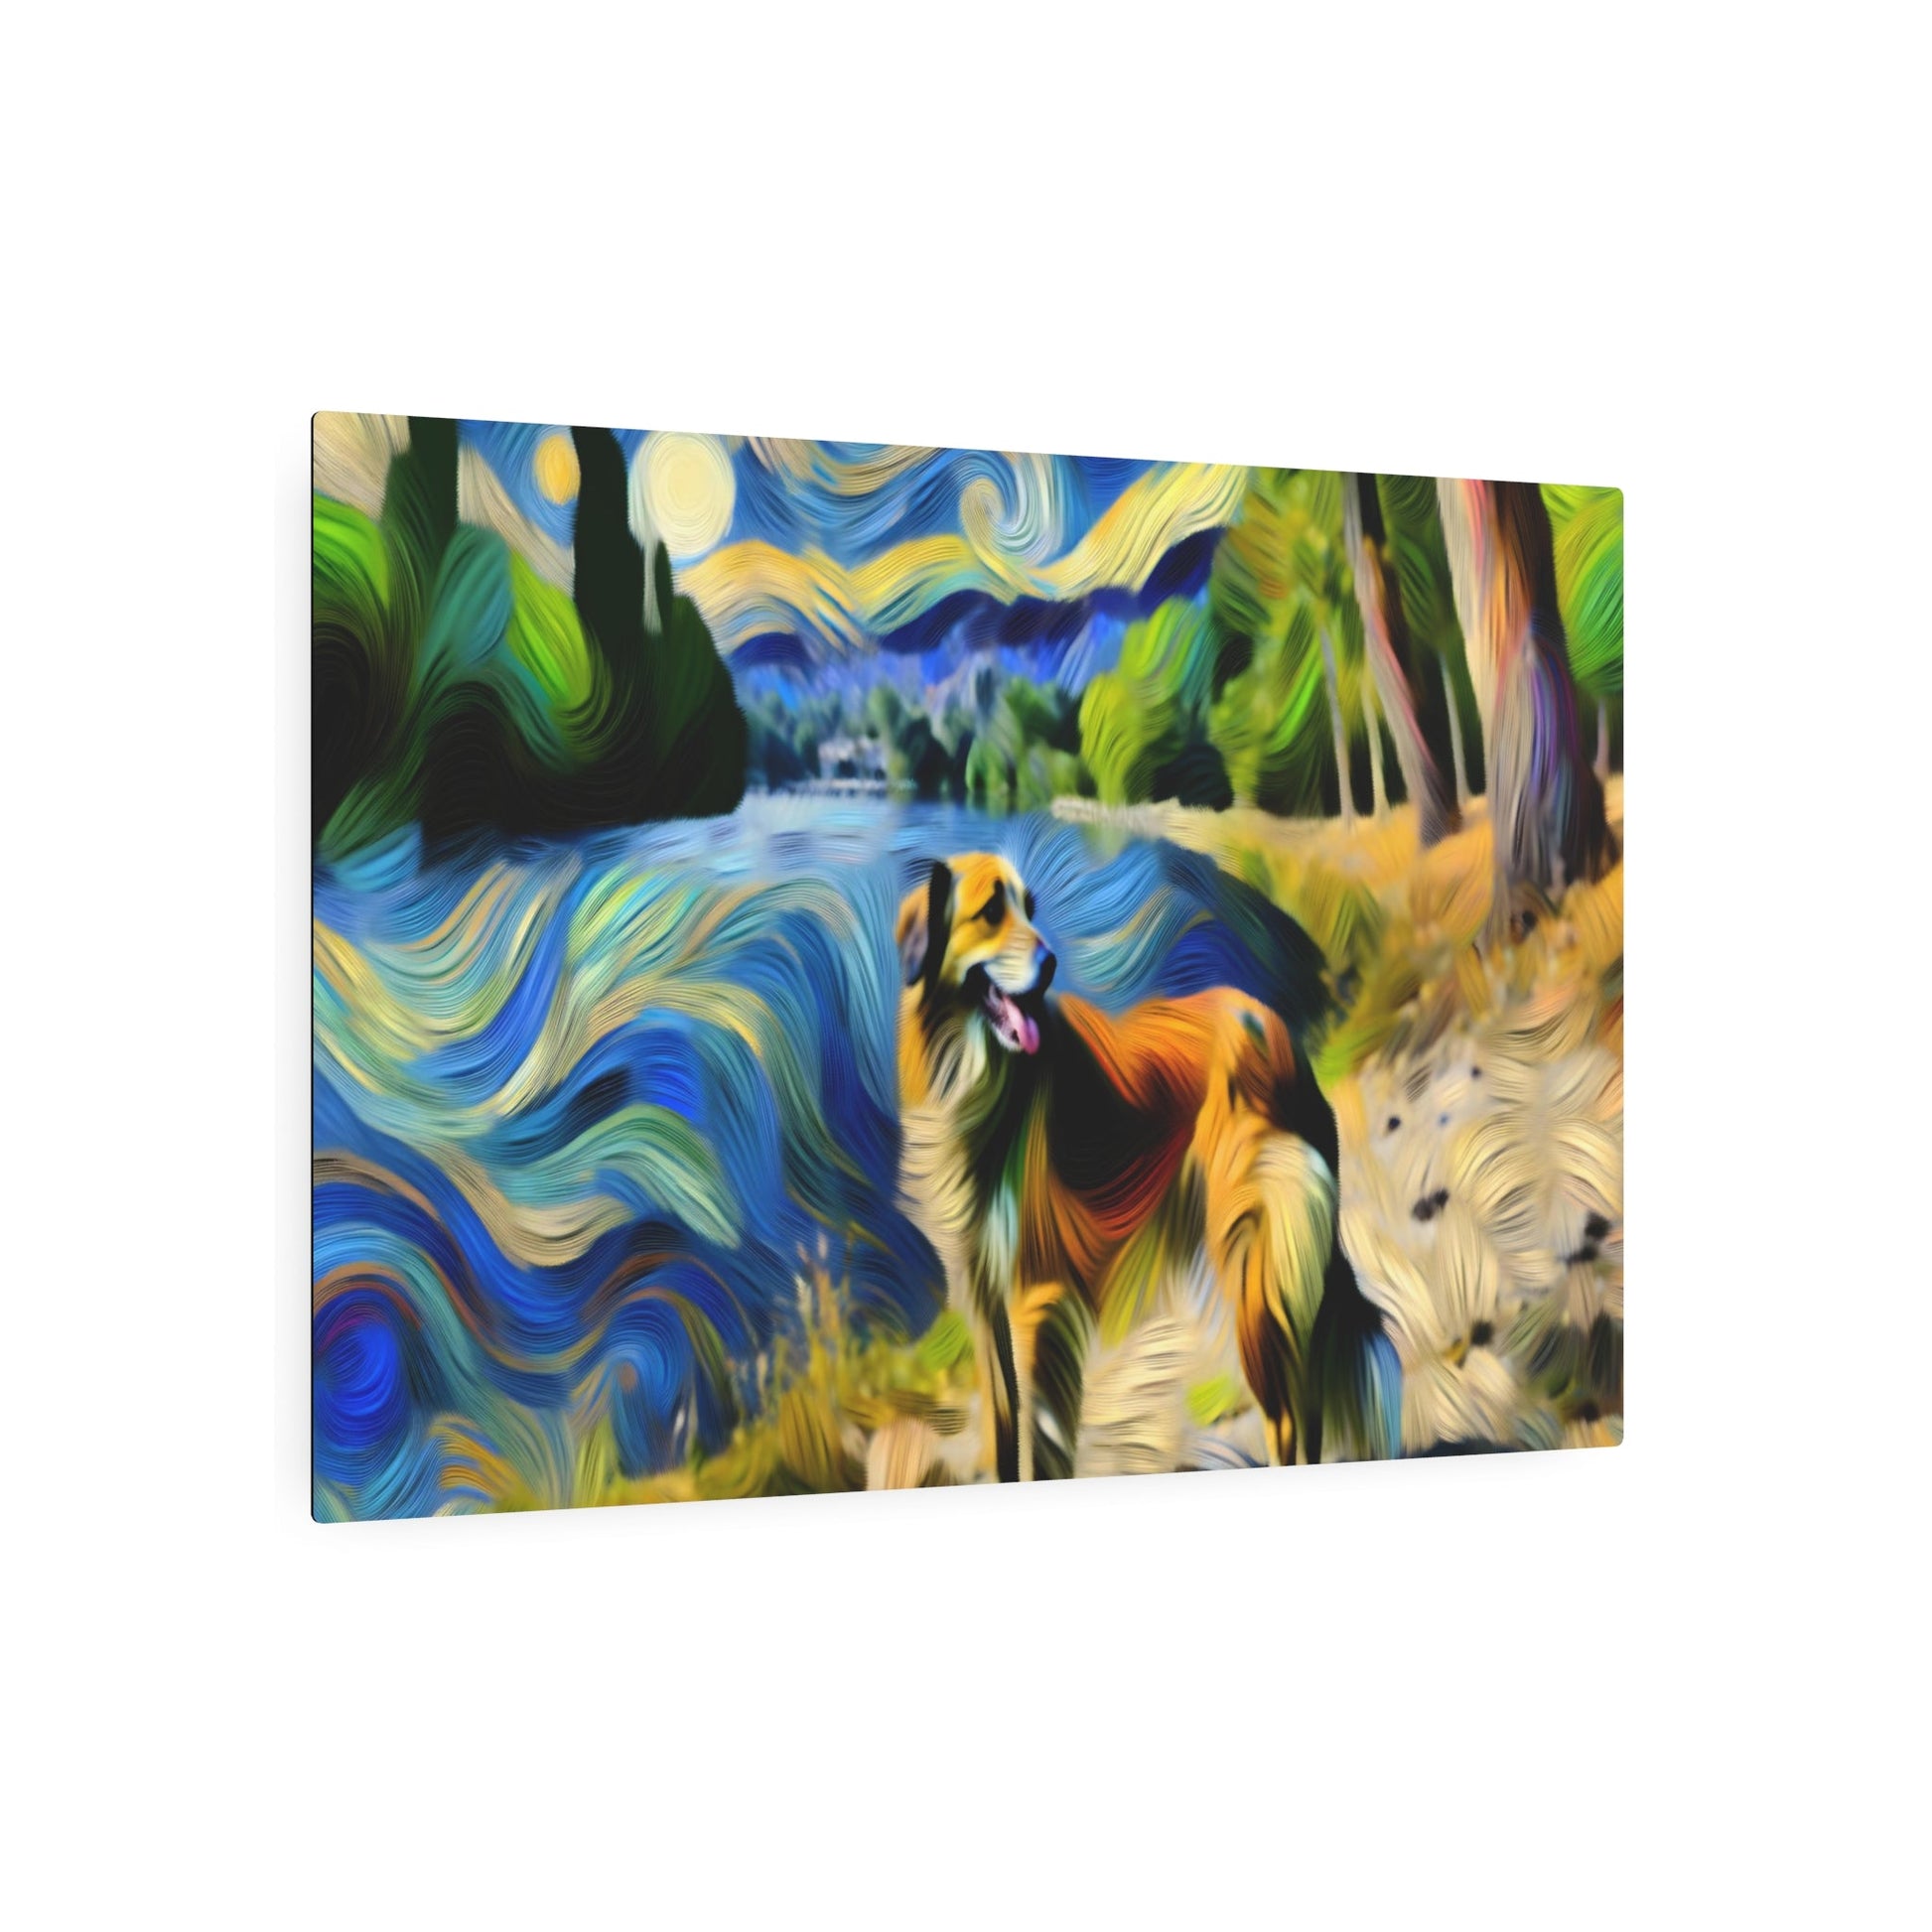 Metal Poster Art | "Post-Impressionism Art Print - Vibrant Western Art Style Featuring a Loyal Dog by a Picturesque River, Expressing Artist's Subject - Metal Poster Art 36″ x 24″ (Horizontal) 0.12''